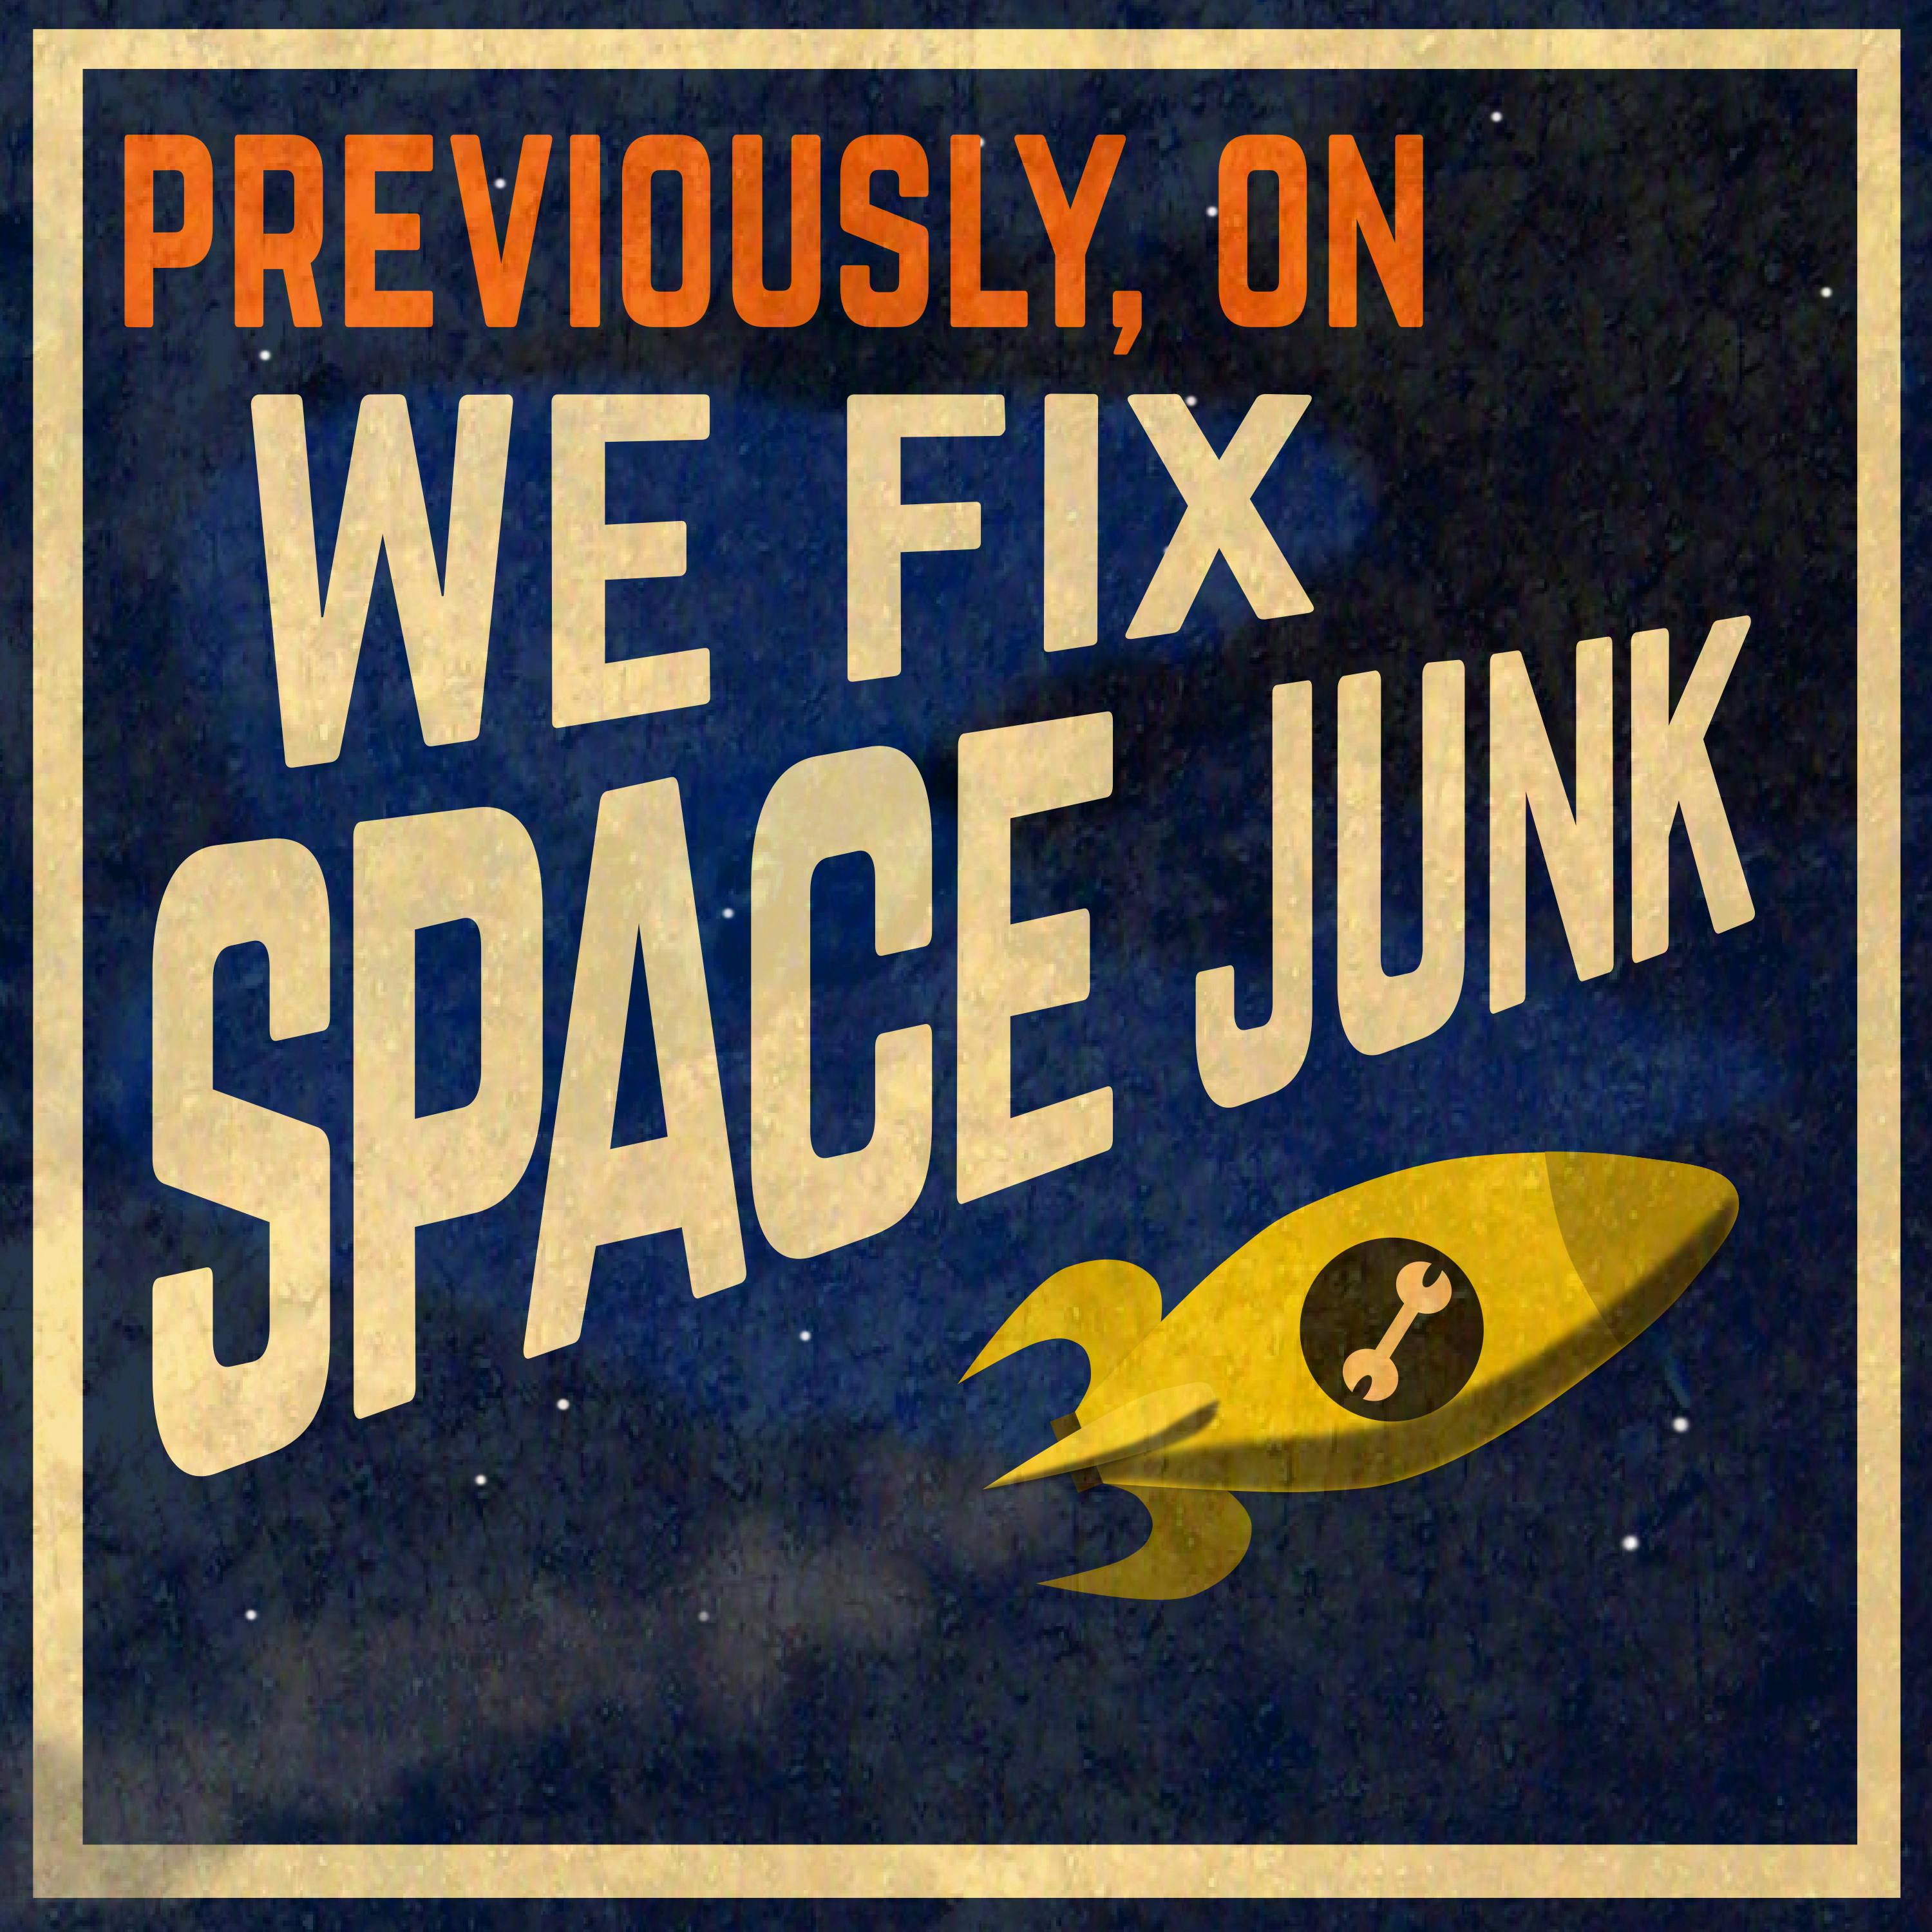 Previously, On We Fix Space Junk...